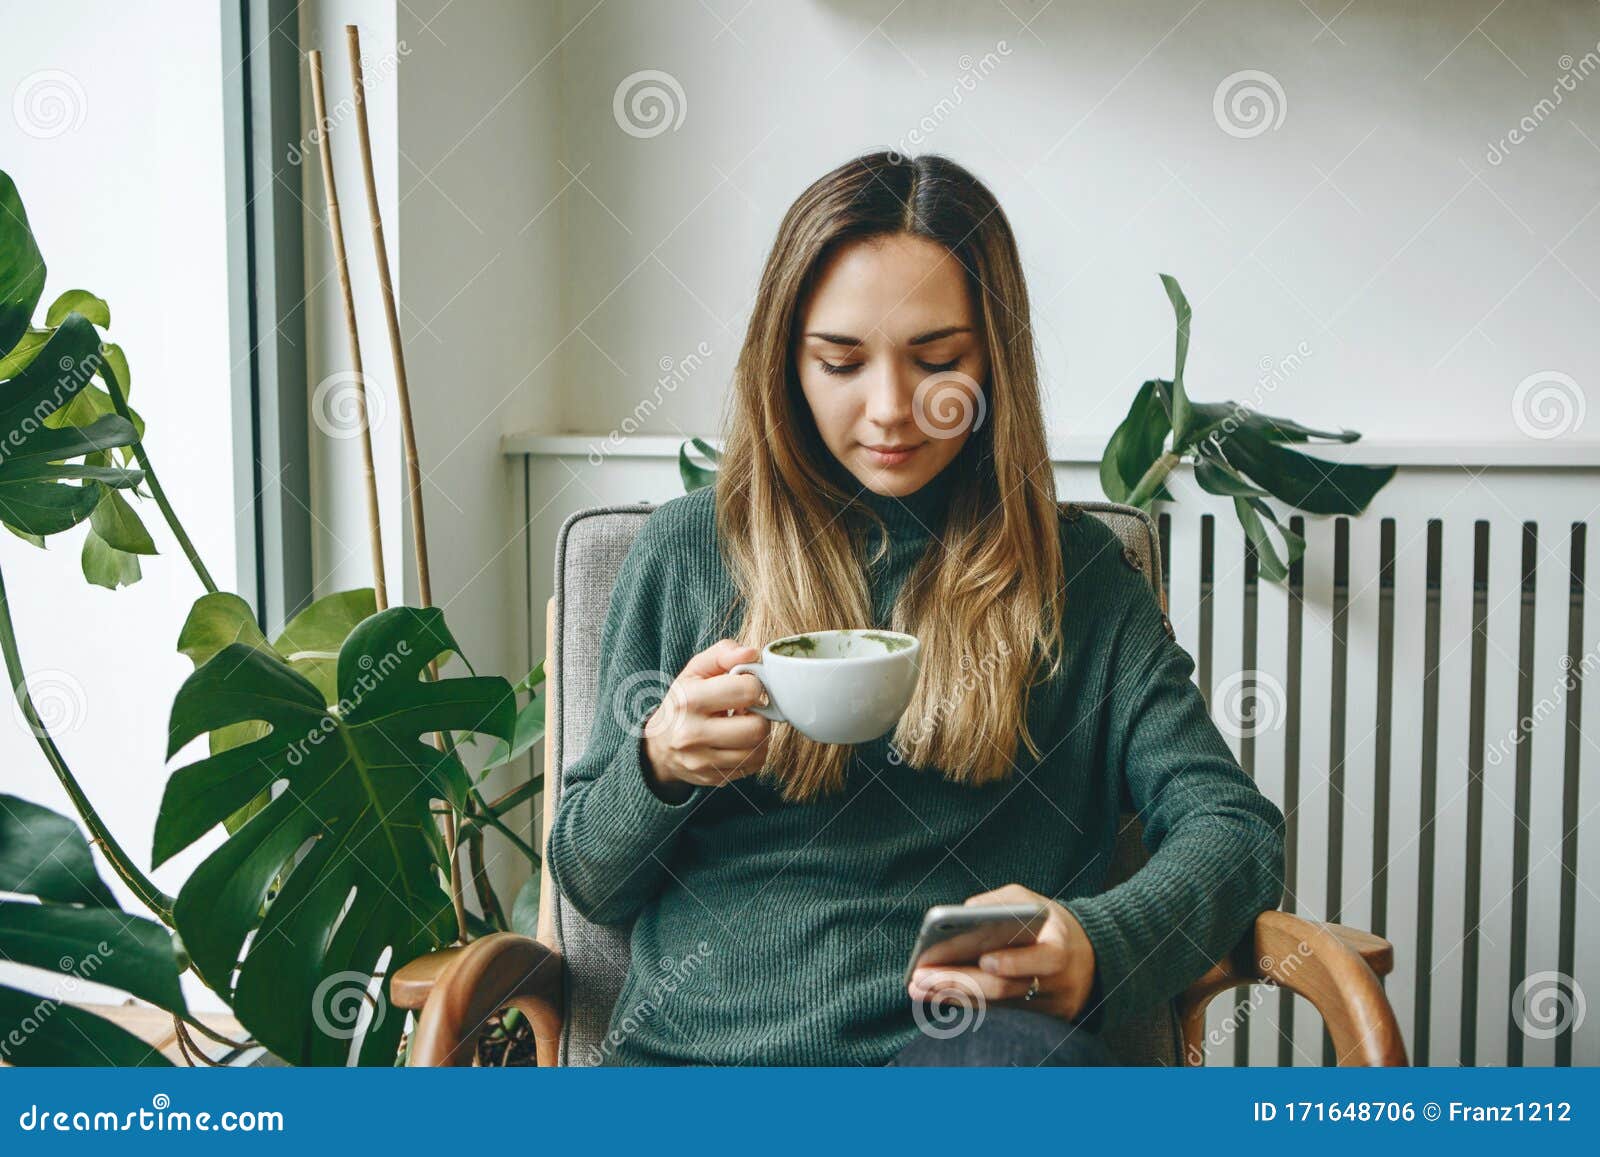 The girl uses a cell phone stock photo. Image of message - 171648706